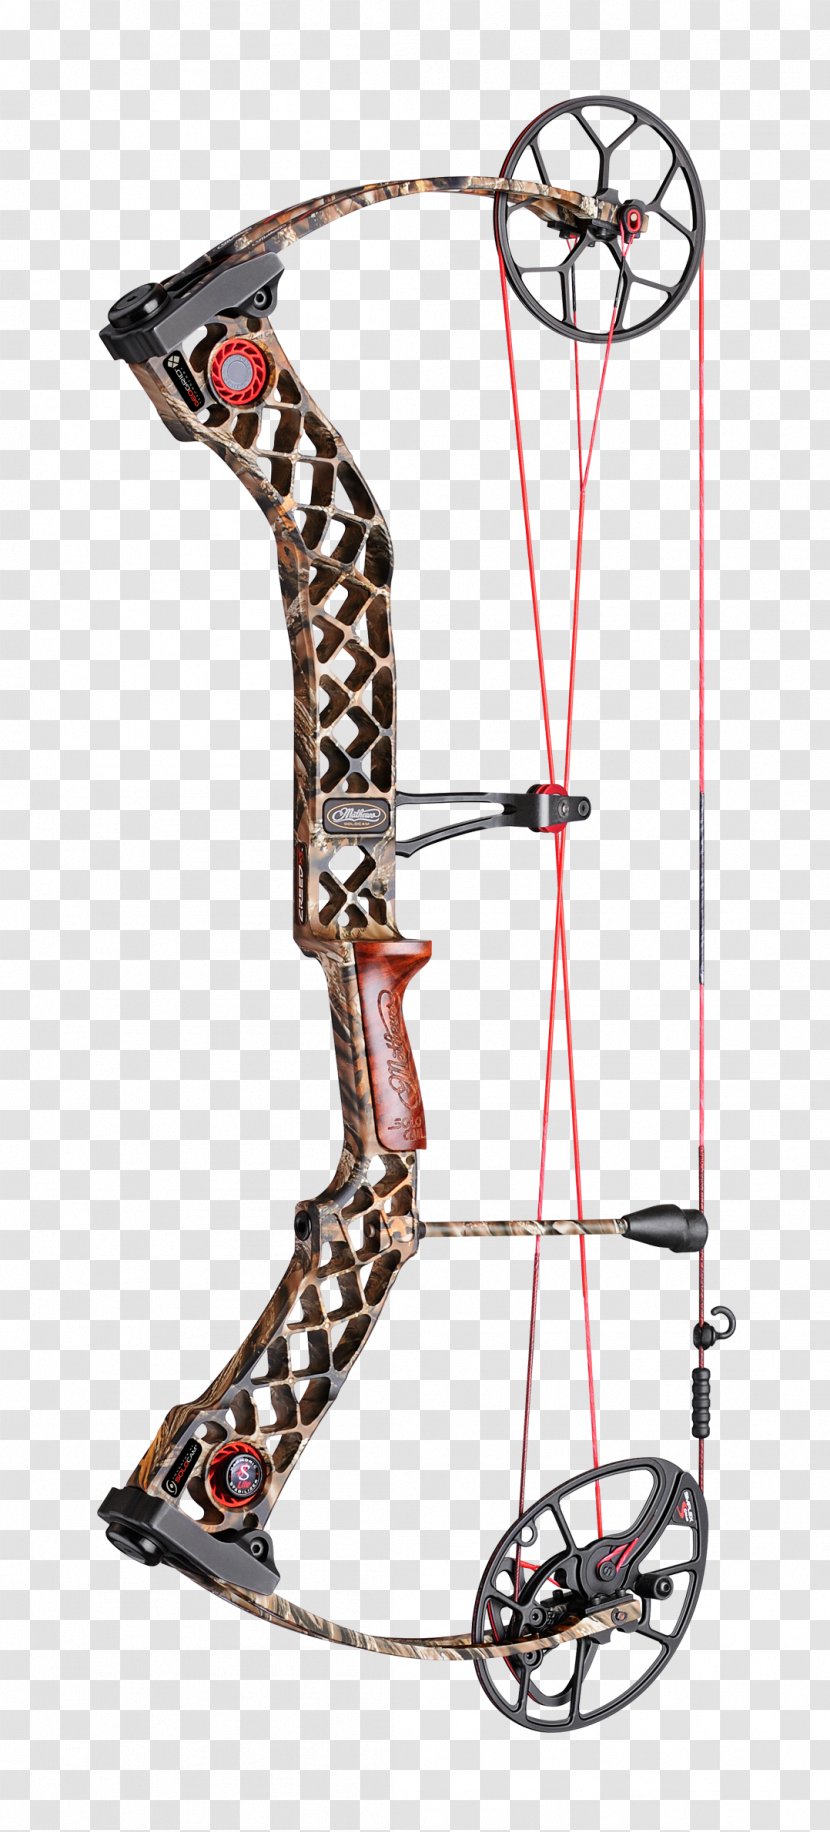 Bowhunting Compound Bows Bow And Arrow - Hunting Transparent PNG